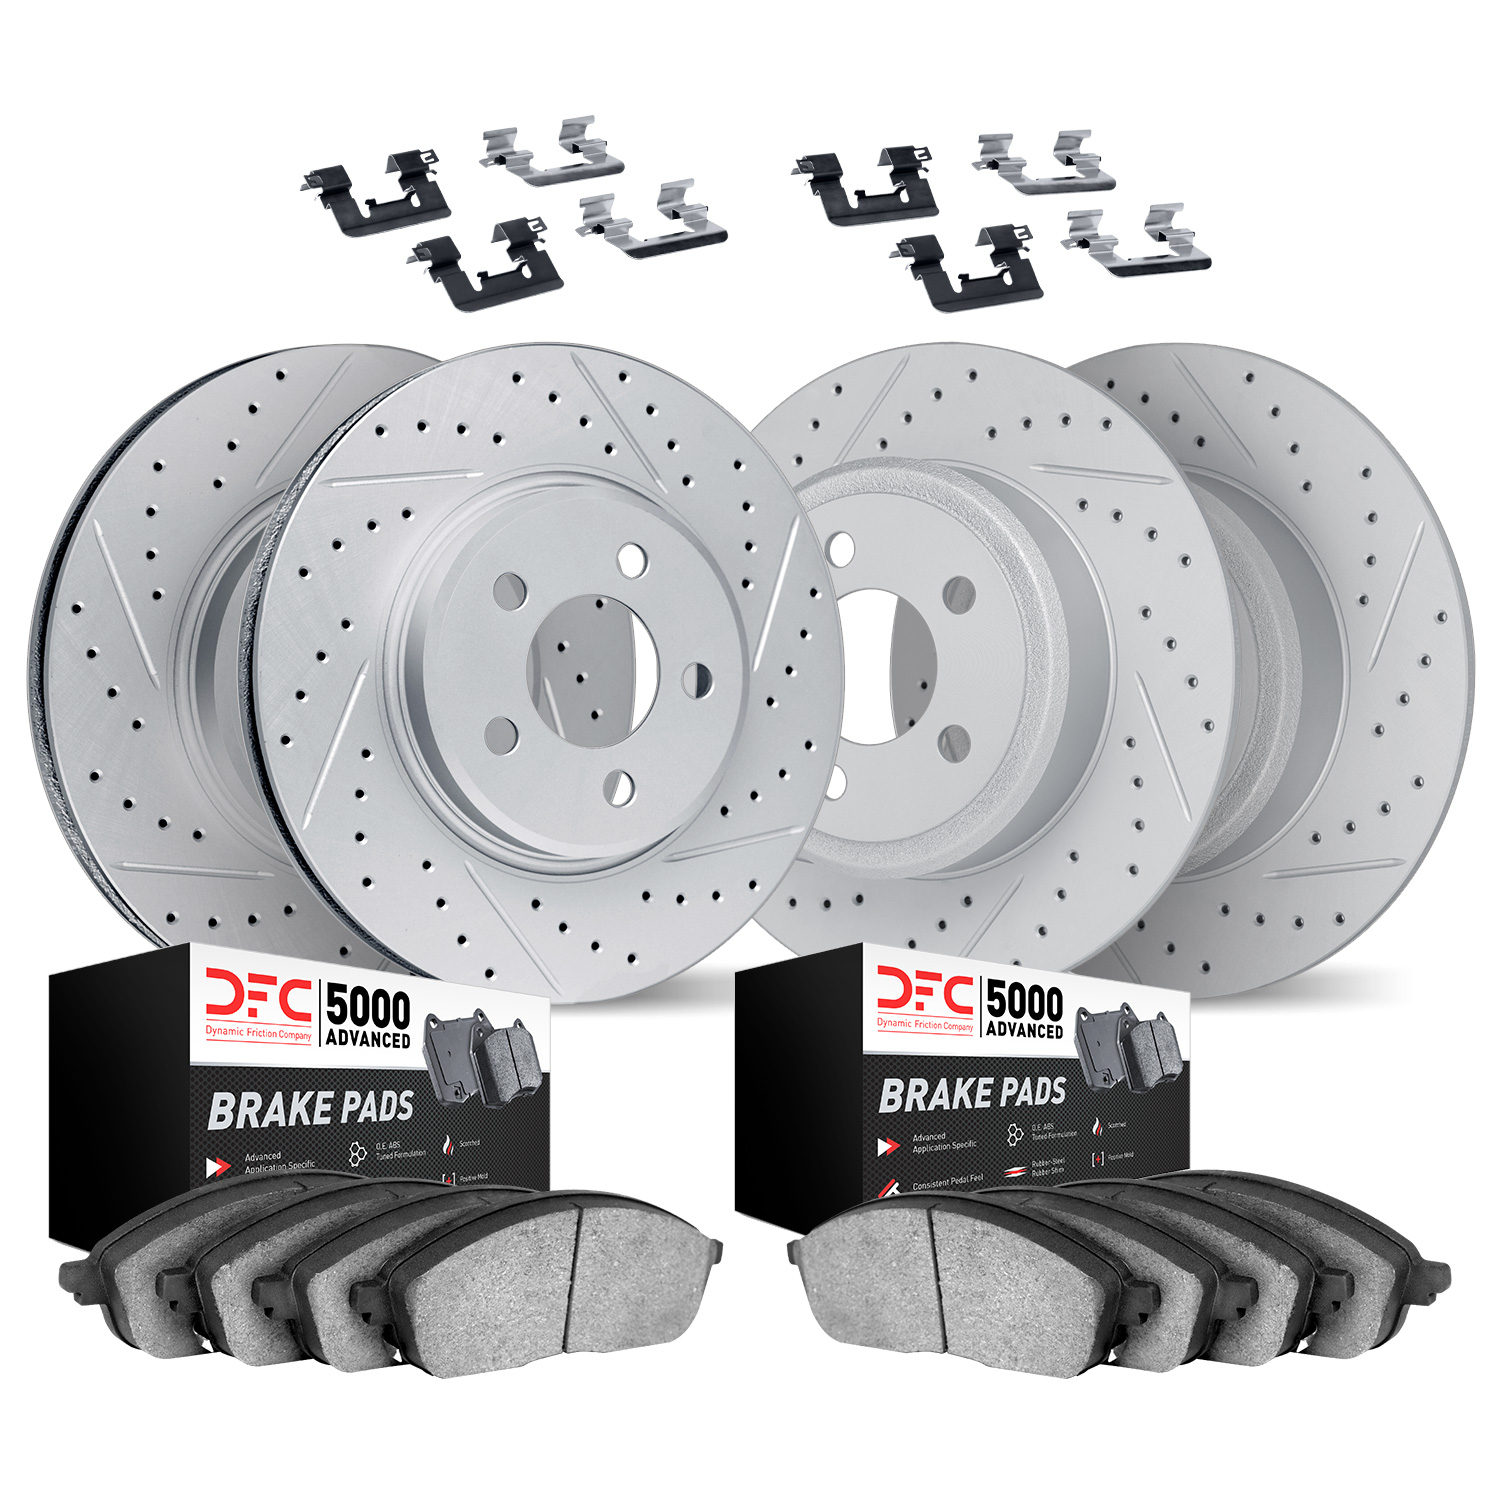 2514-13001 Geoperformance Drilled/Slotted Rotors w/5000 Advanced Brake Pads Kit & Hardware, 1996-1996 Subaru, Position: Front an